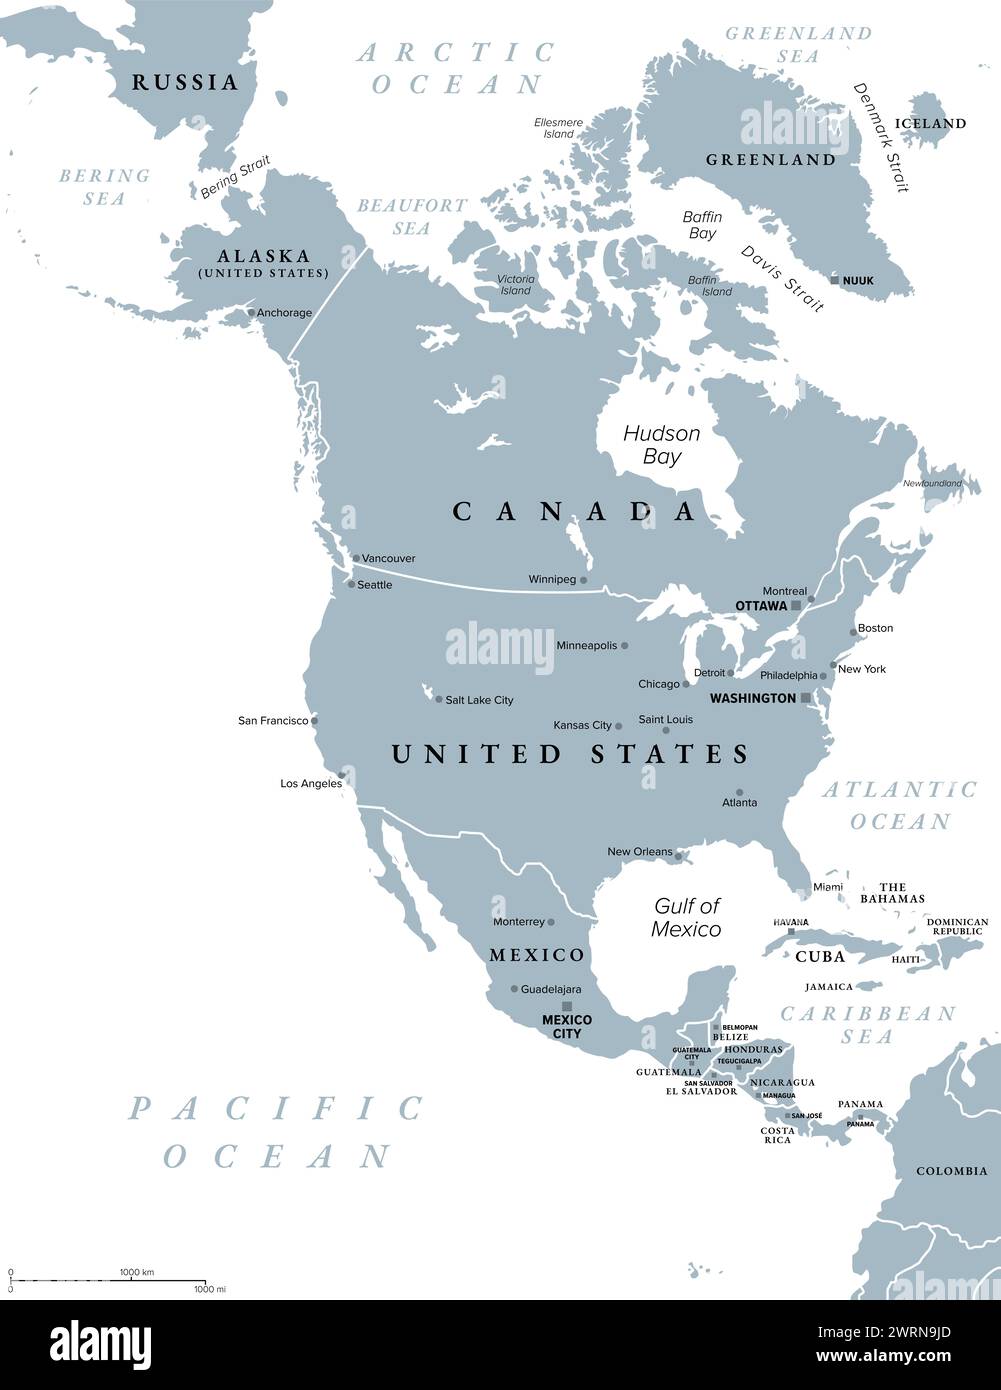 North America, gray political map. Continent bordered by South America, Caribbean Sea, and by the Arctic, Atlantic and Pacific Ocean. Stock Photo